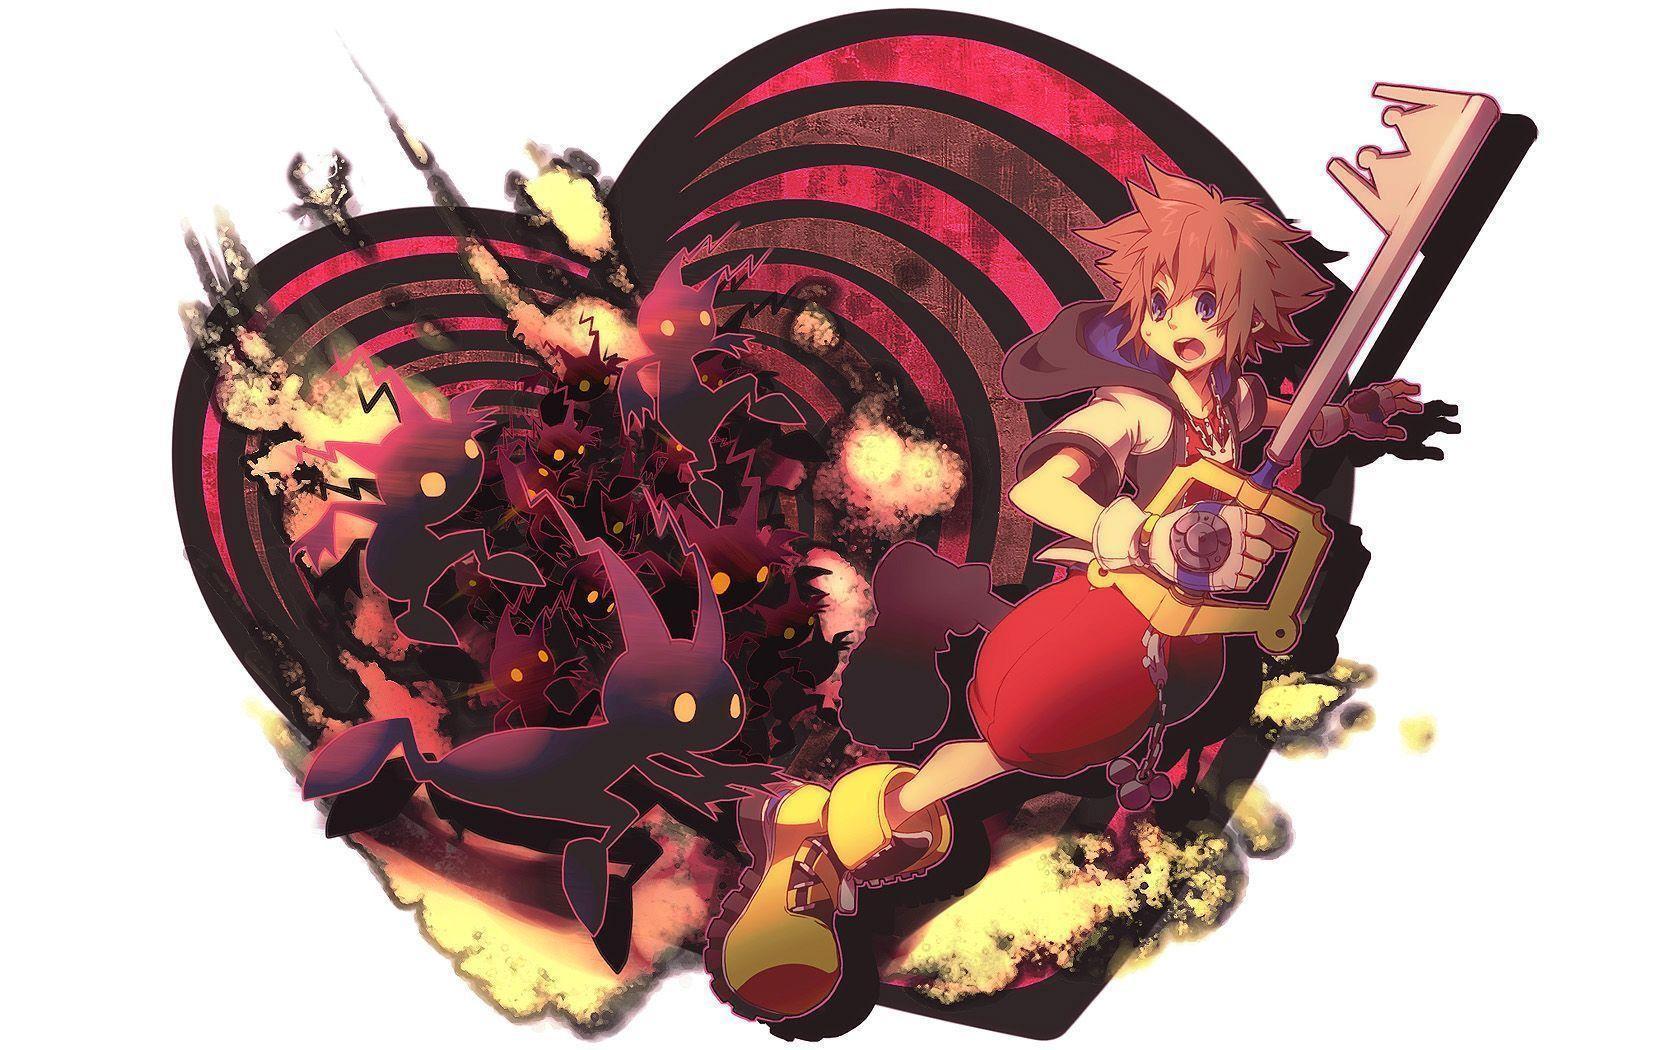 image For > Kingdom Hearts Heartless Wallpaper